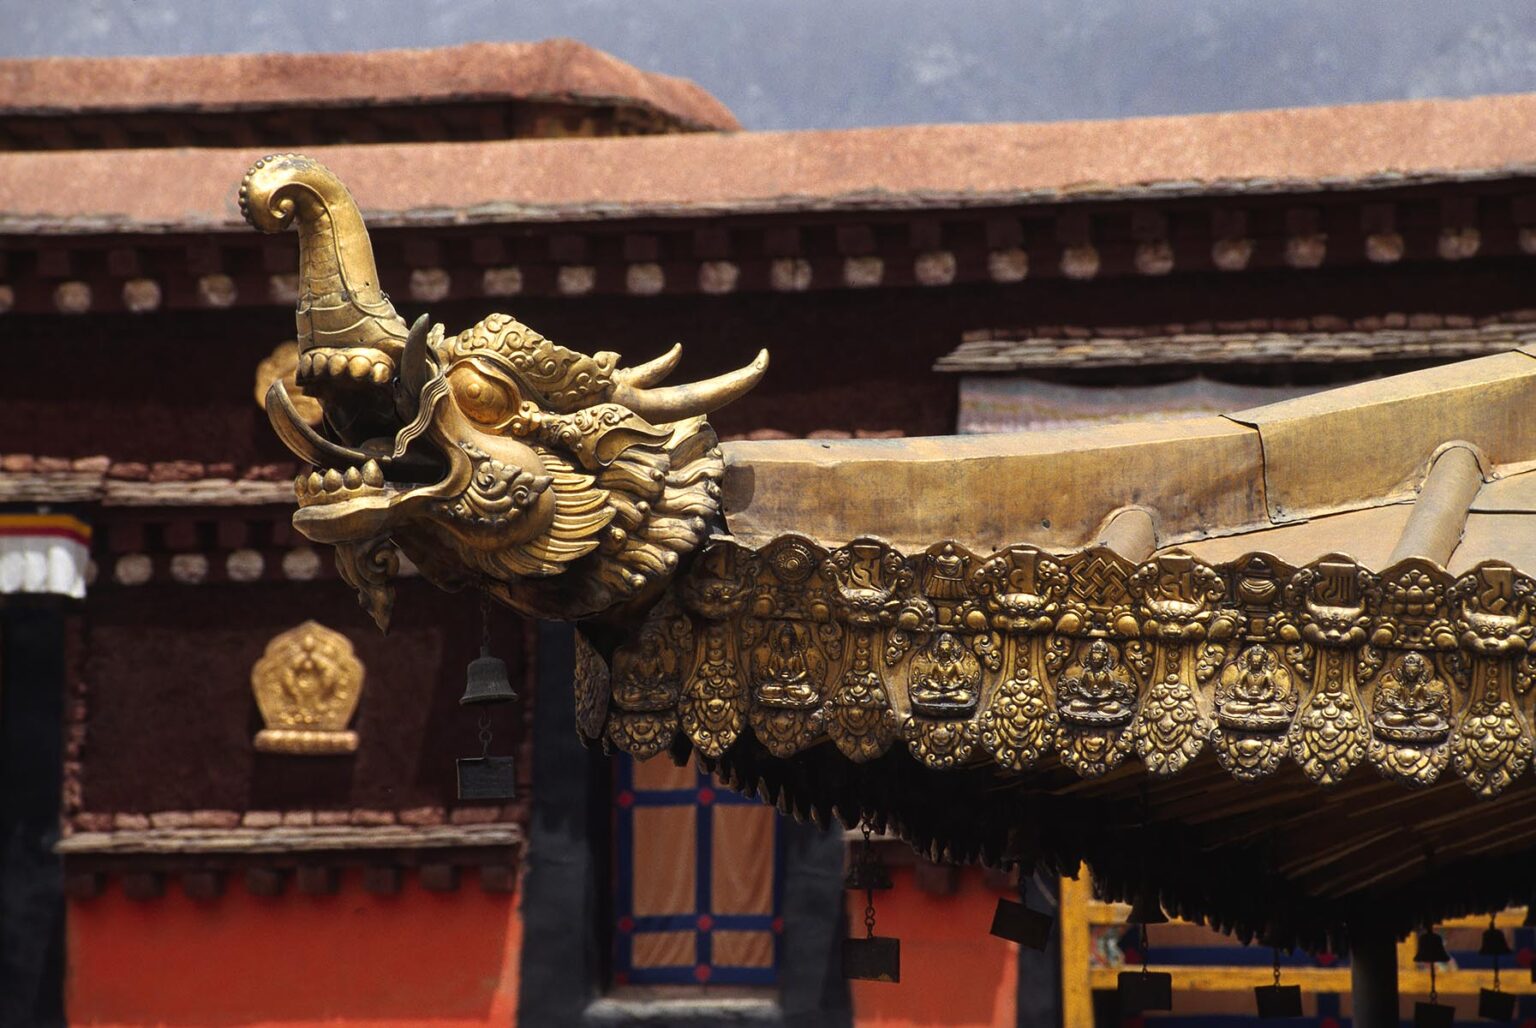 A GOLDEN DRAGON is one of the many elaborate ROOF DETAILS found on the JOKHANG - LHASA, TIBET